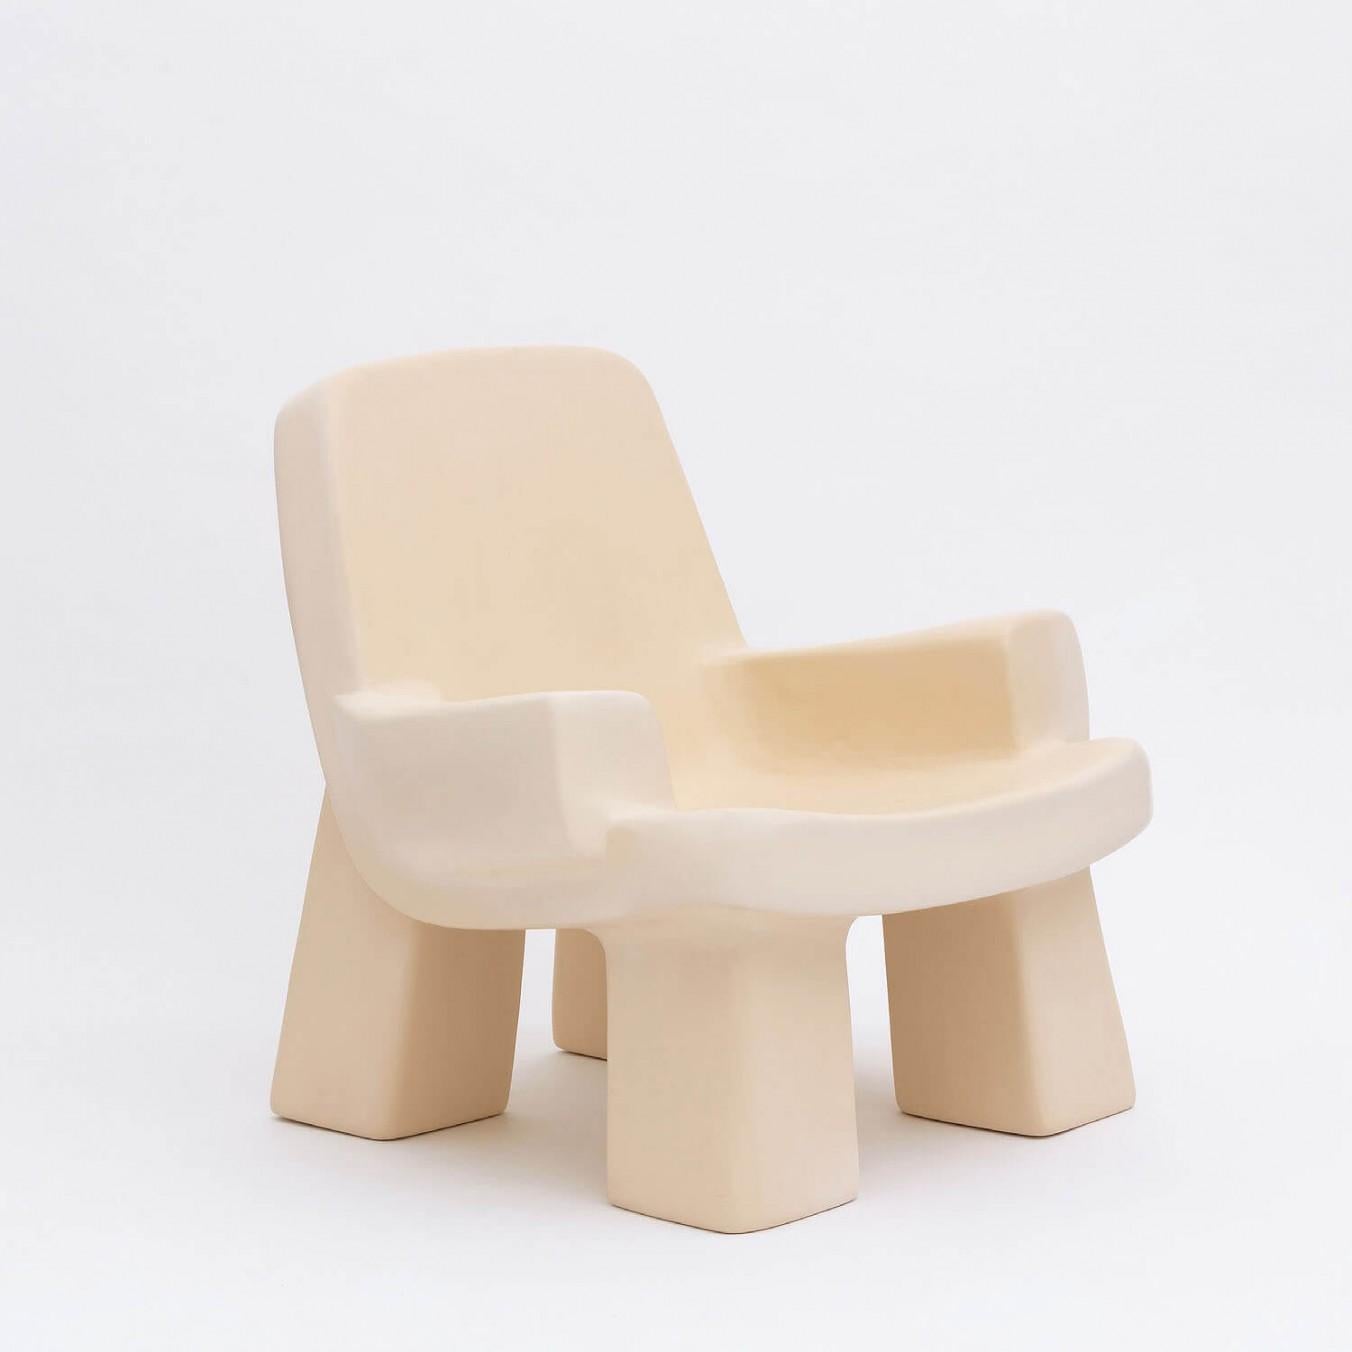 Contemporary fiberglass armchair - Fudge chair by Faye Toogood. This is shown in the malachite fiberglass finish. 
Design: Faye Toogood
Material: Fiberglass 
Available also in charcoal, cream or mallow opaque finish

Faye Toogood’s new Fudge